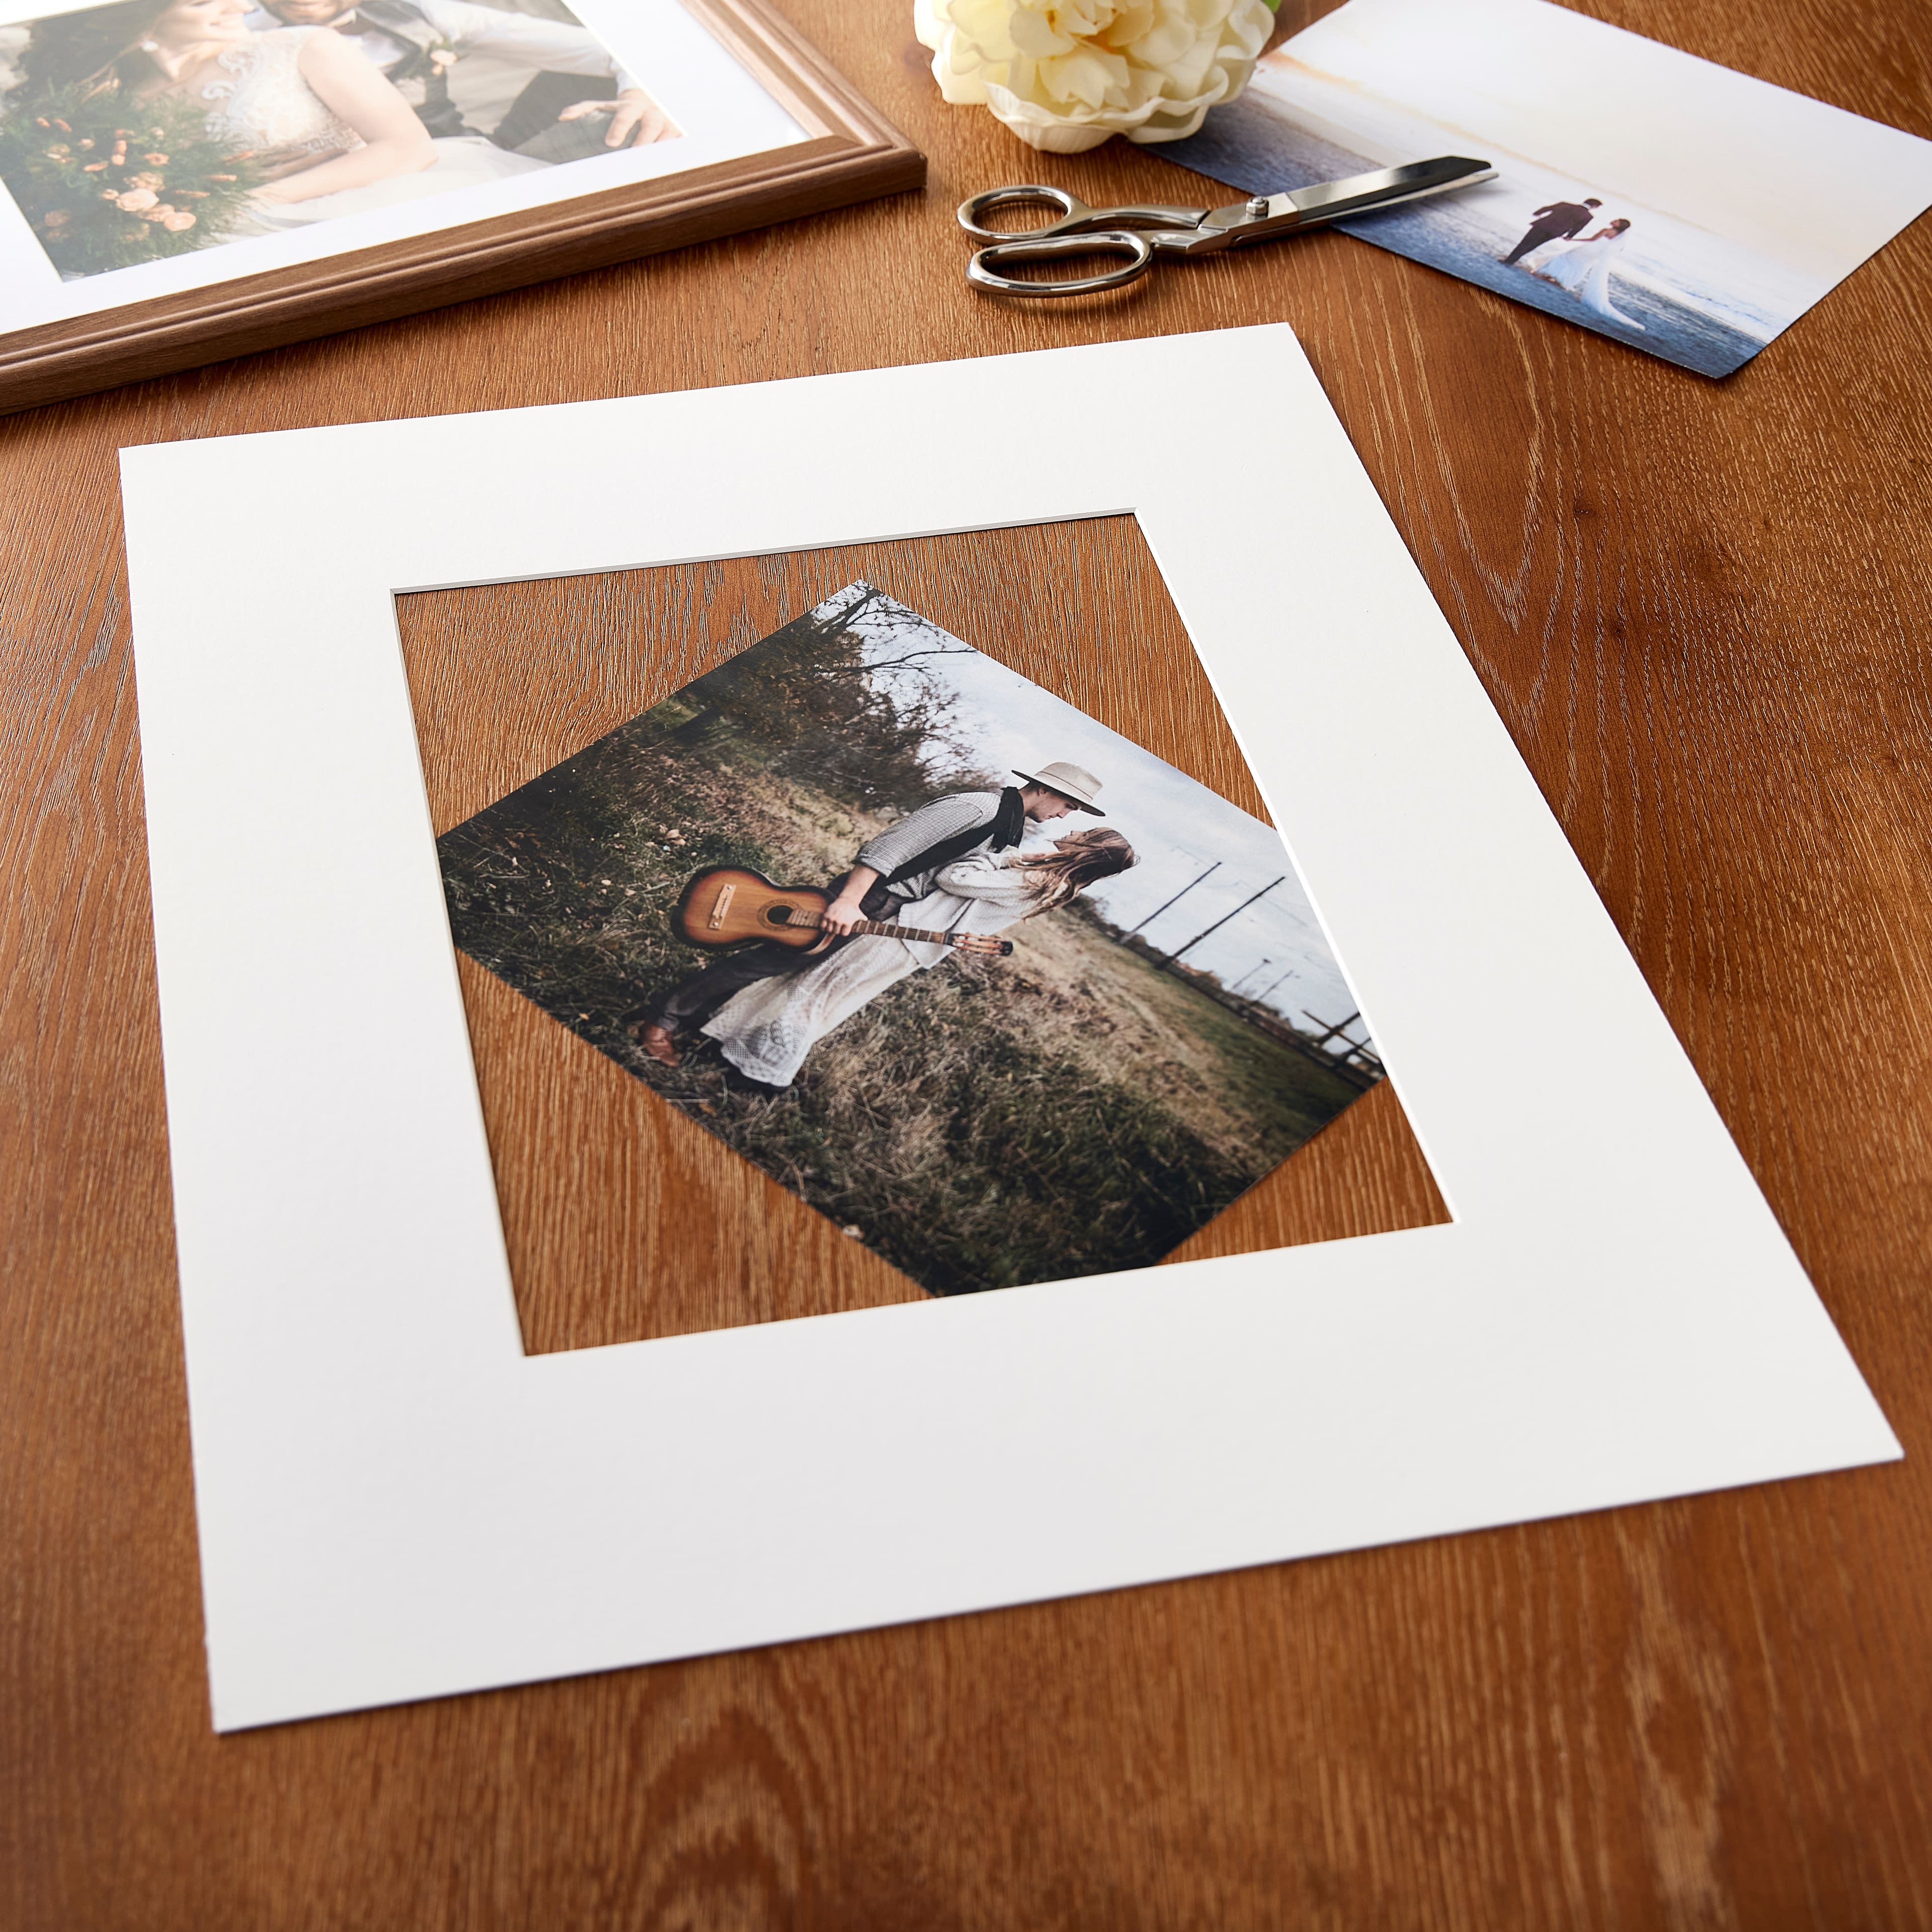 Pack of 100, 8x10 Pre-cut Mat with Blackcore fits 5x7 Picture + Backing +  Bags.